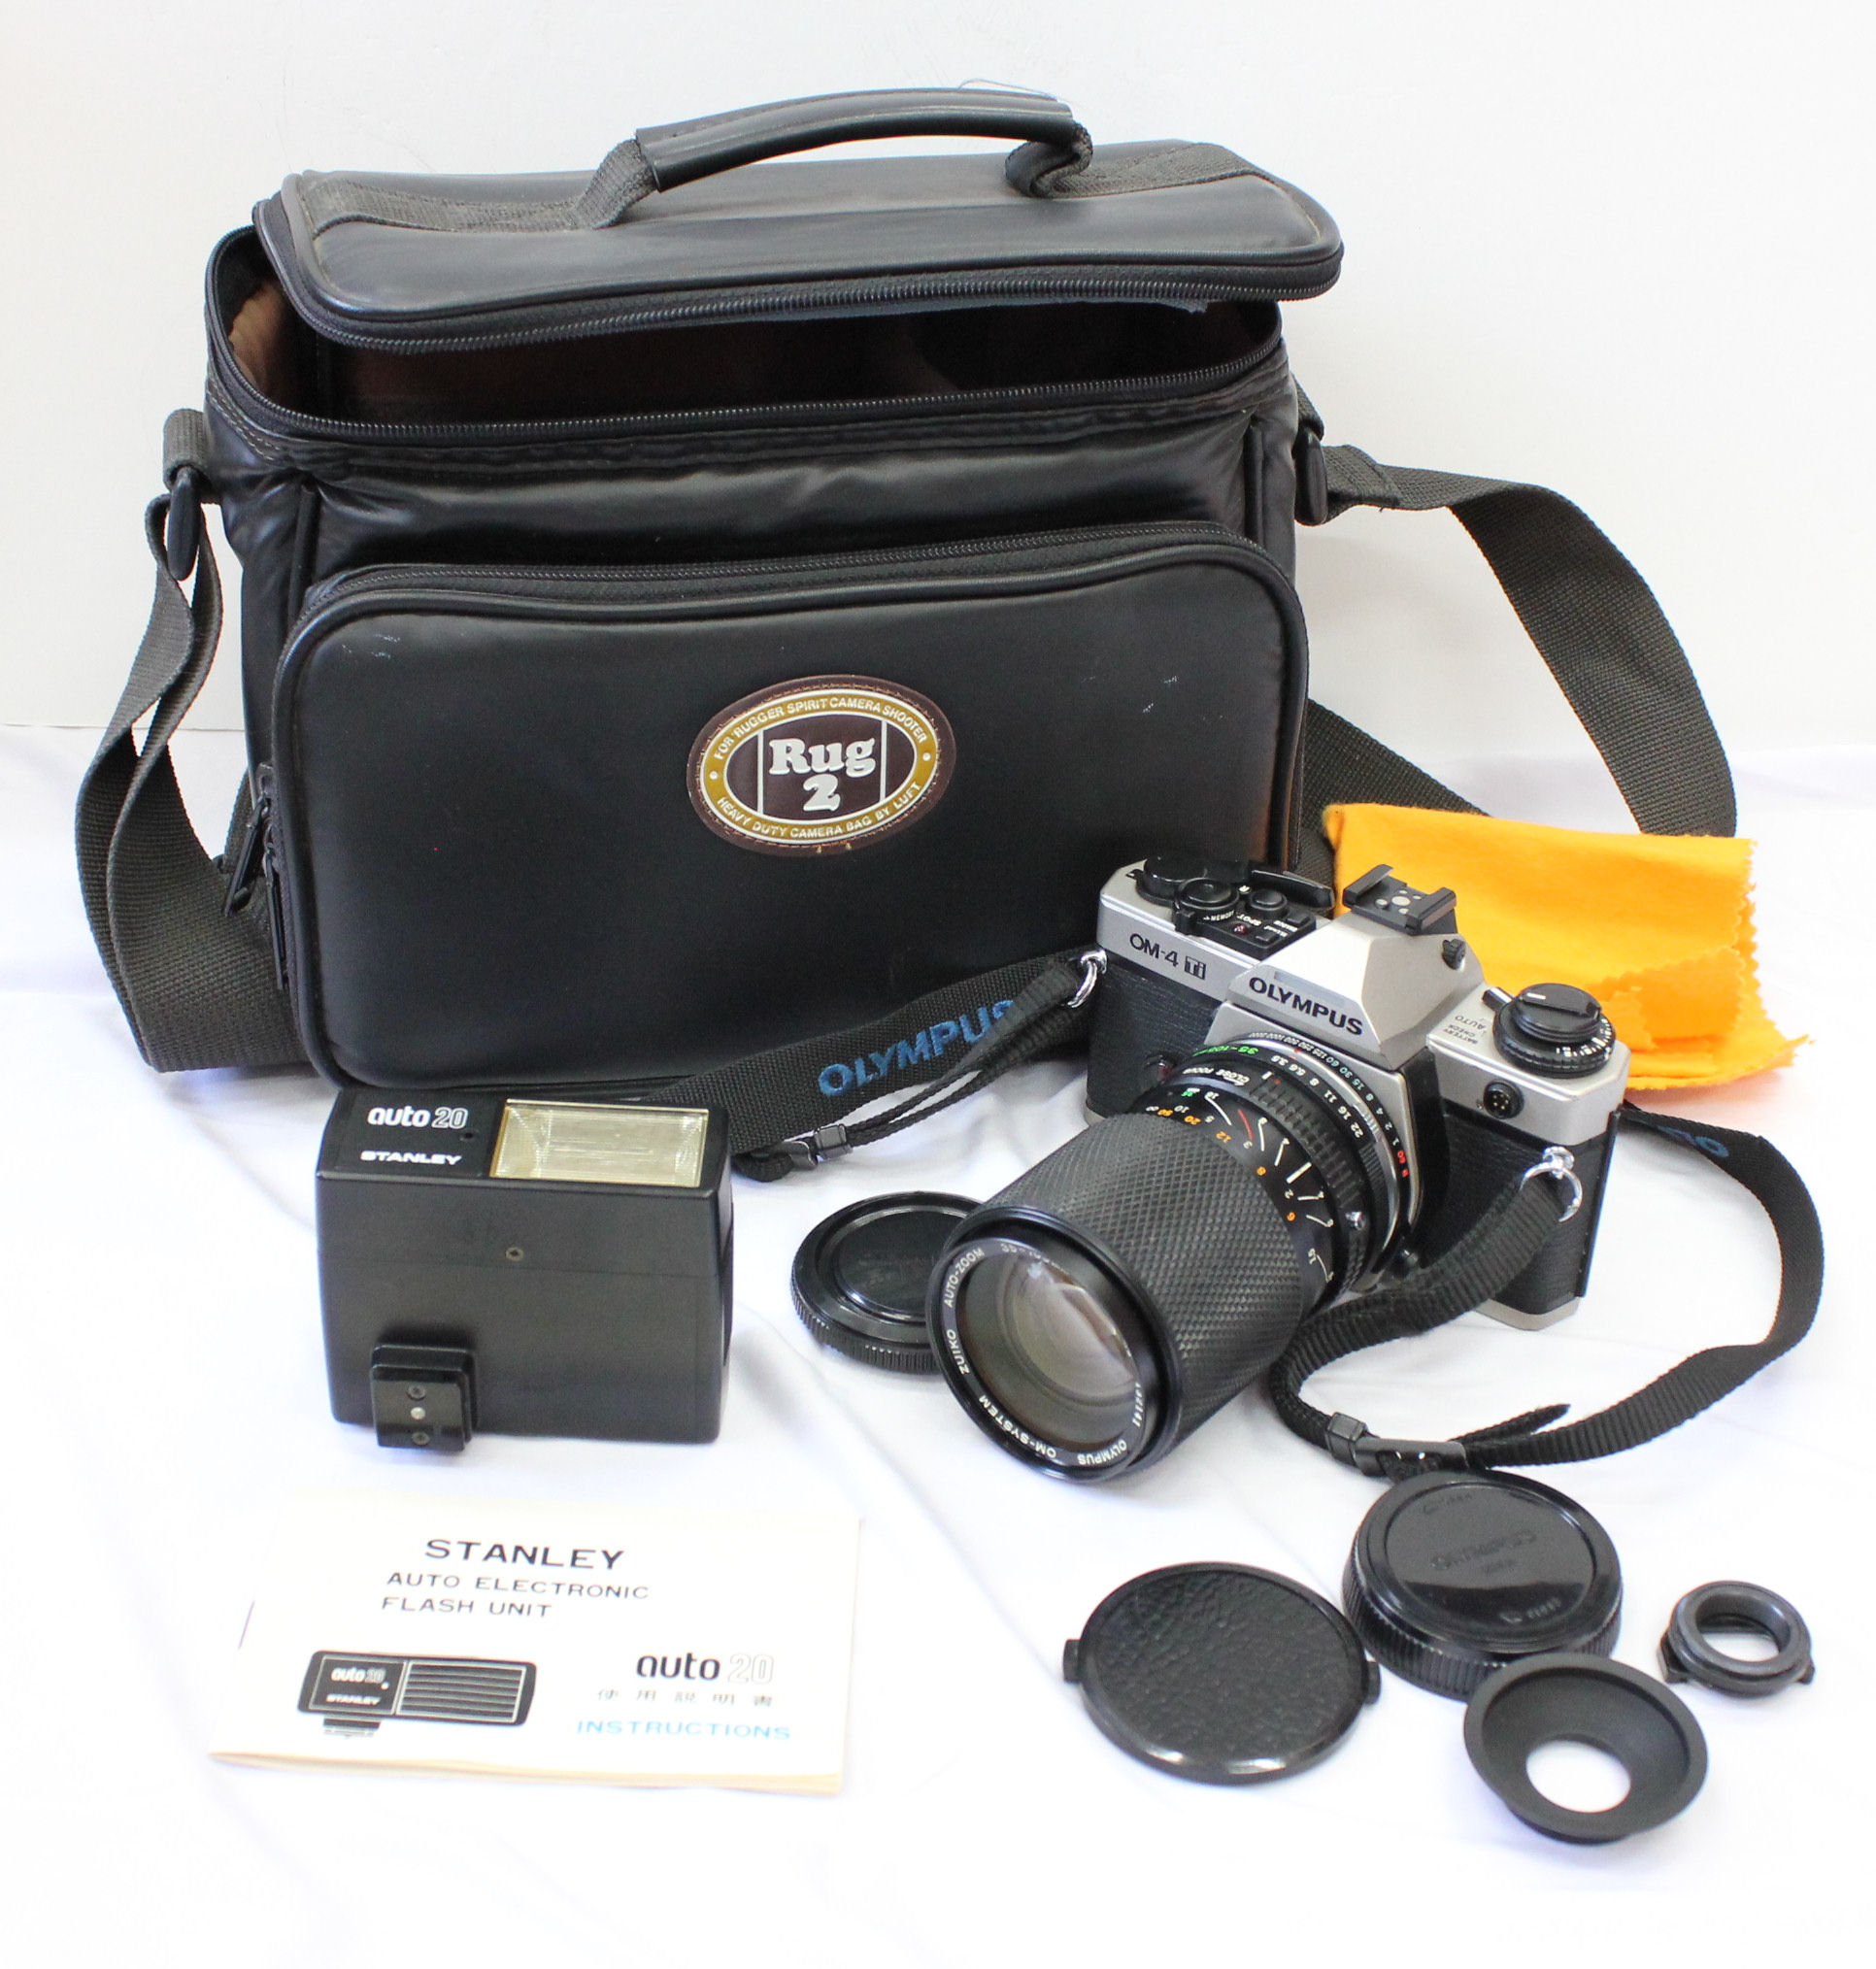 [Excellent+++++] Olympus OM-4 TI 35mm SLR Film Camera and Zuiko Auto-Zoom Lens and Flash